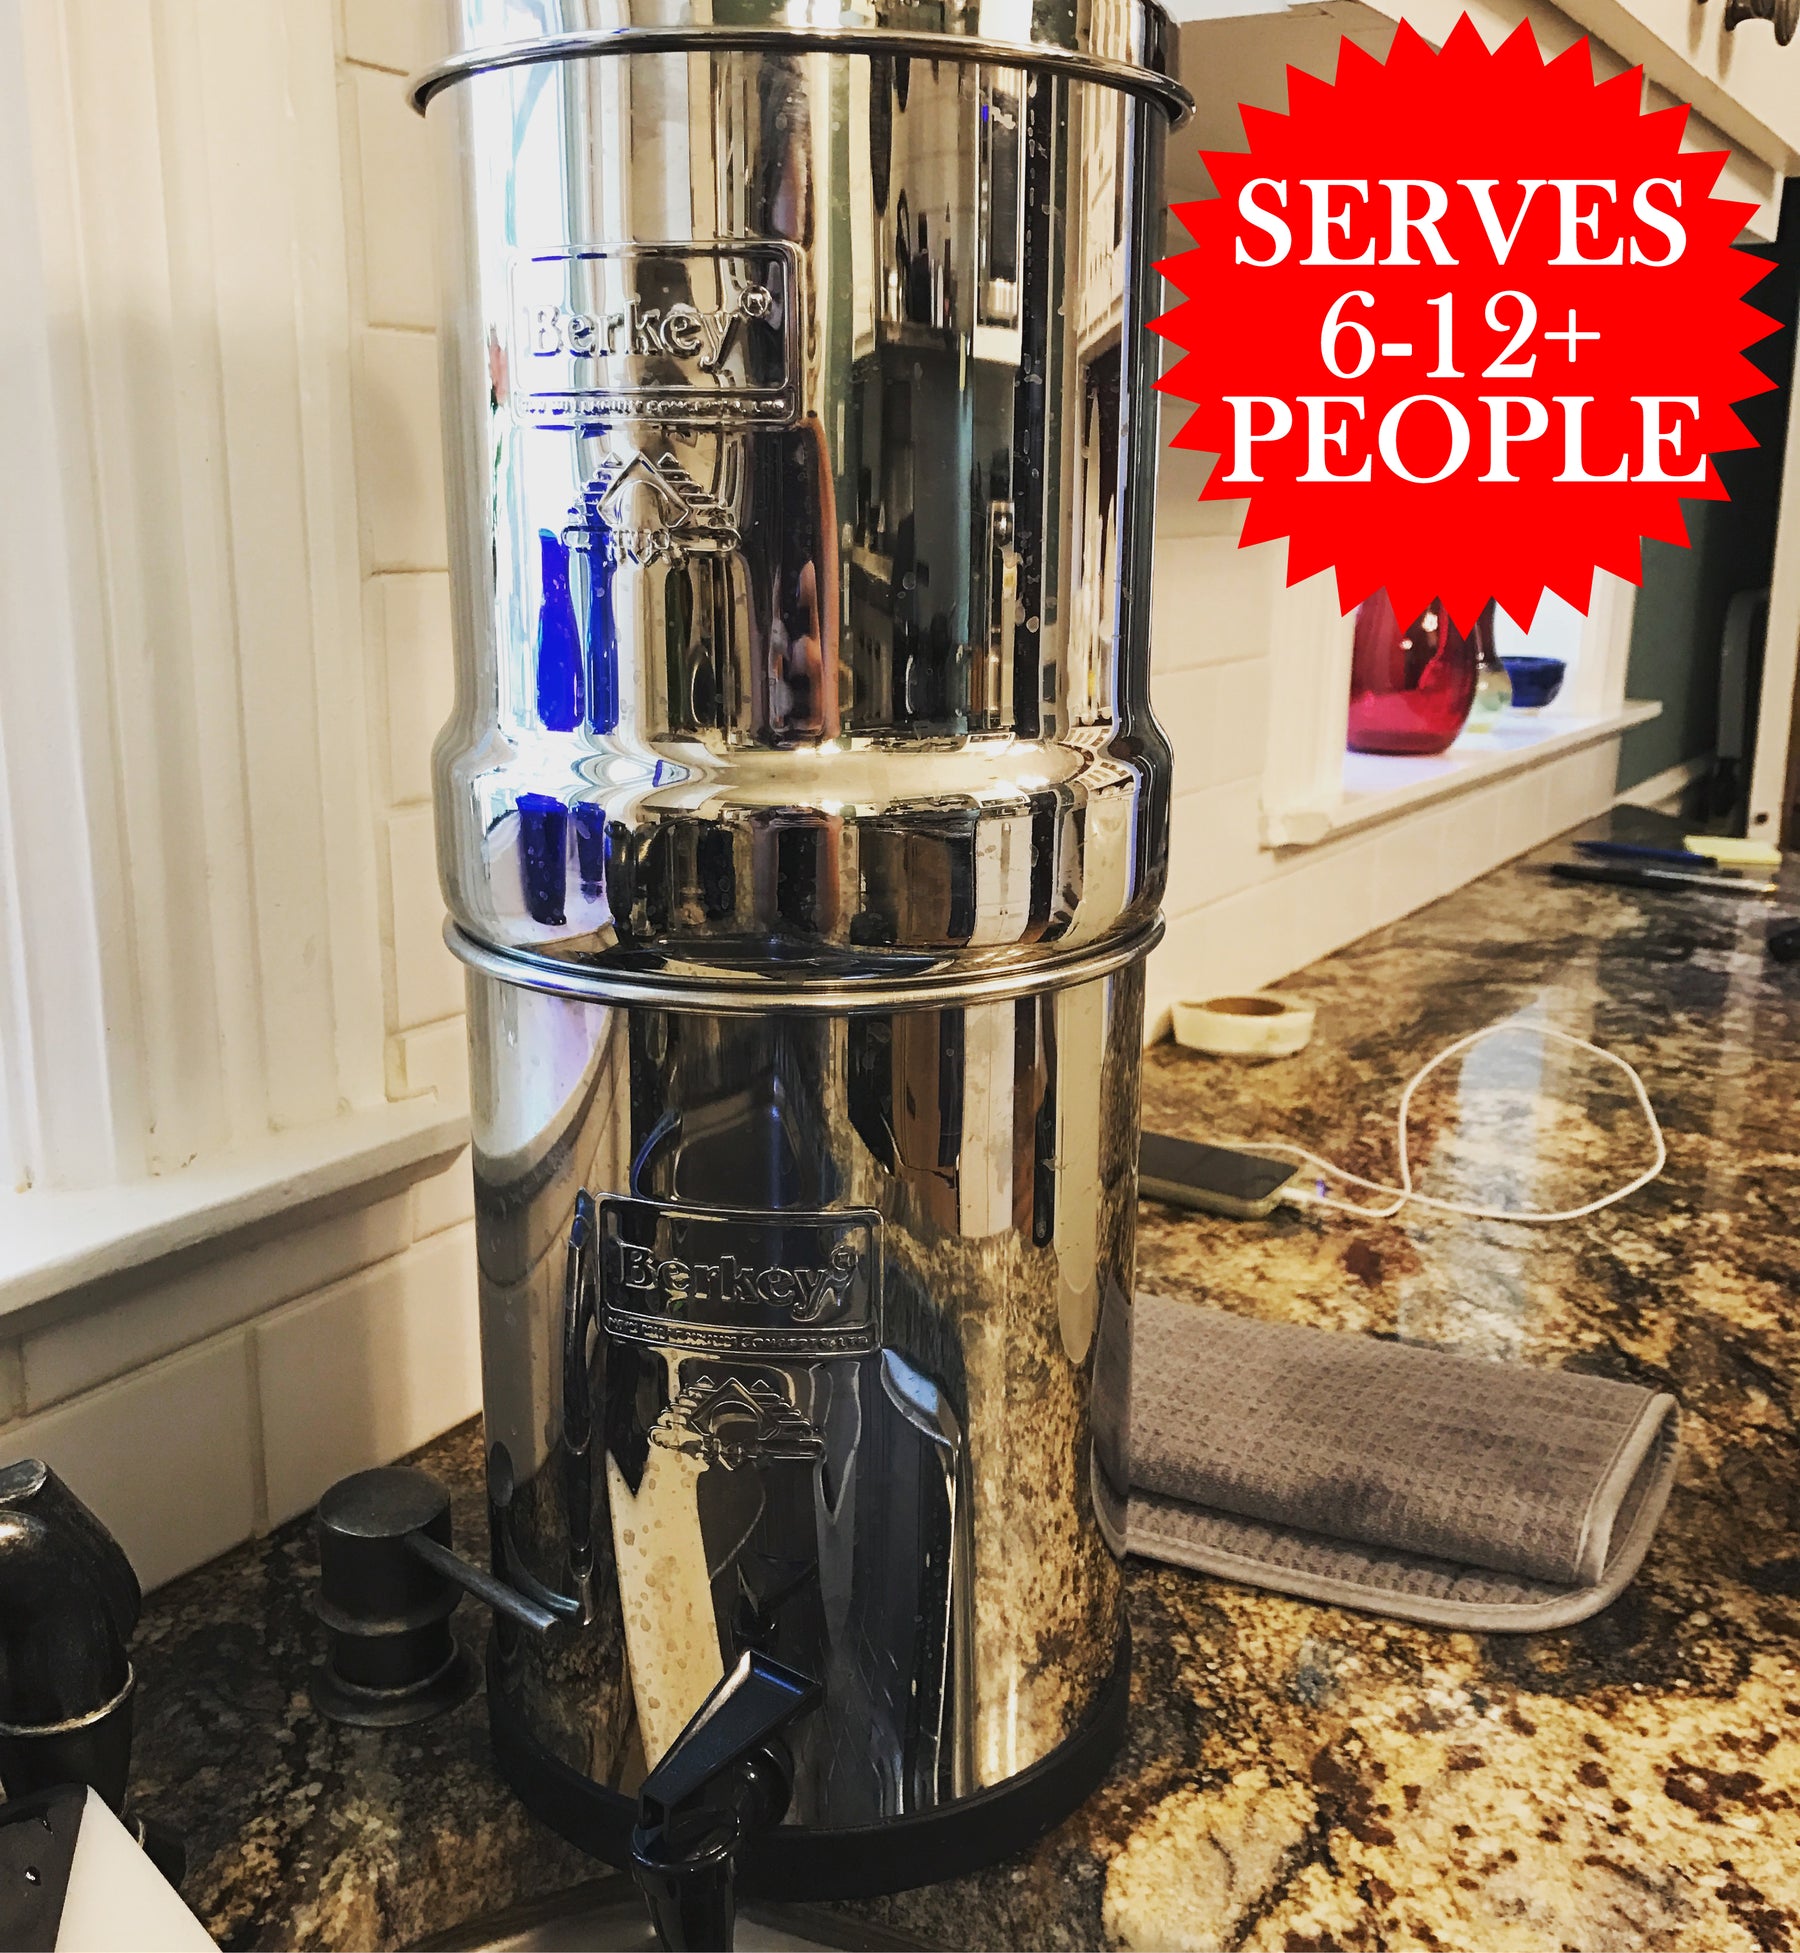 Berkey Water Filter Review: Is It Worth the Money?